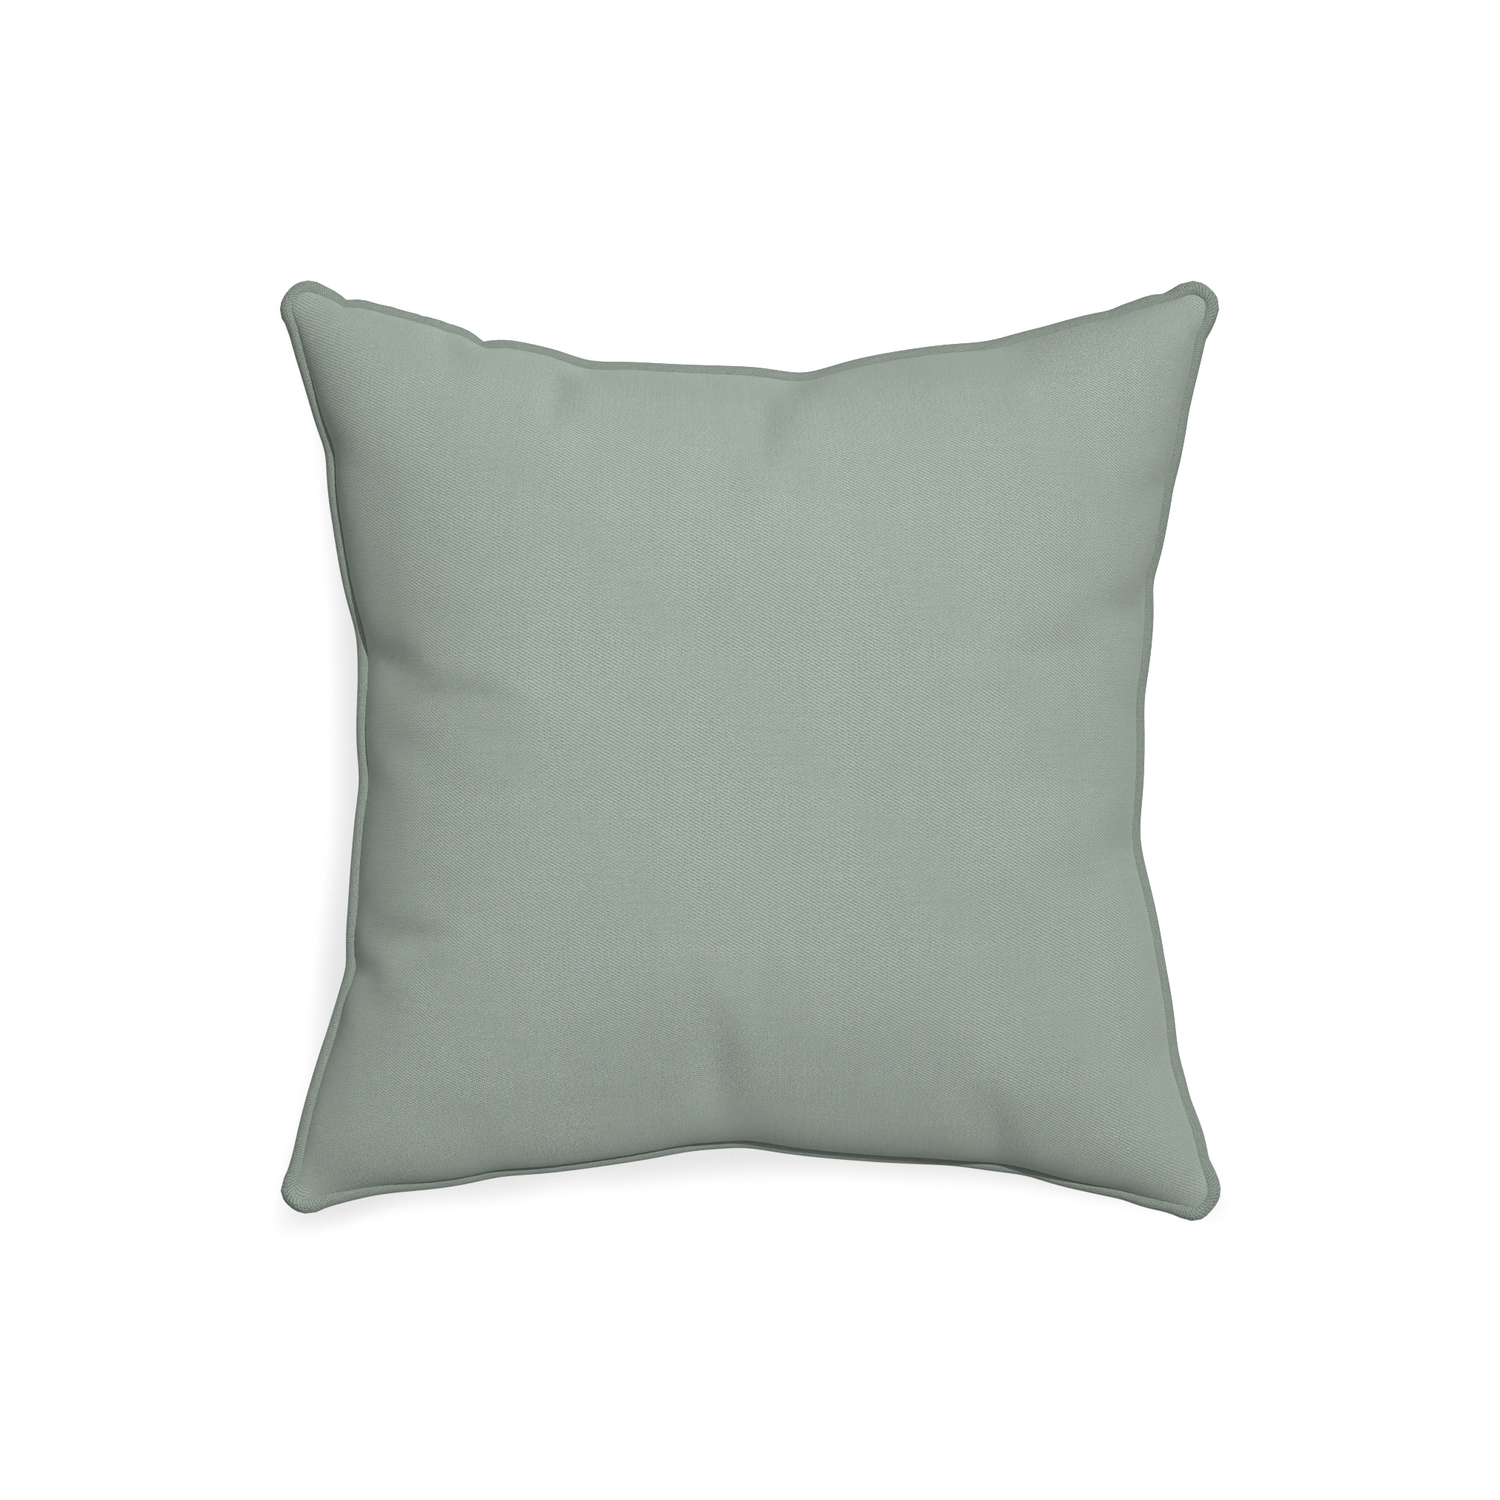 20-square sage custom sage green cottonpillow with sage piping on white background